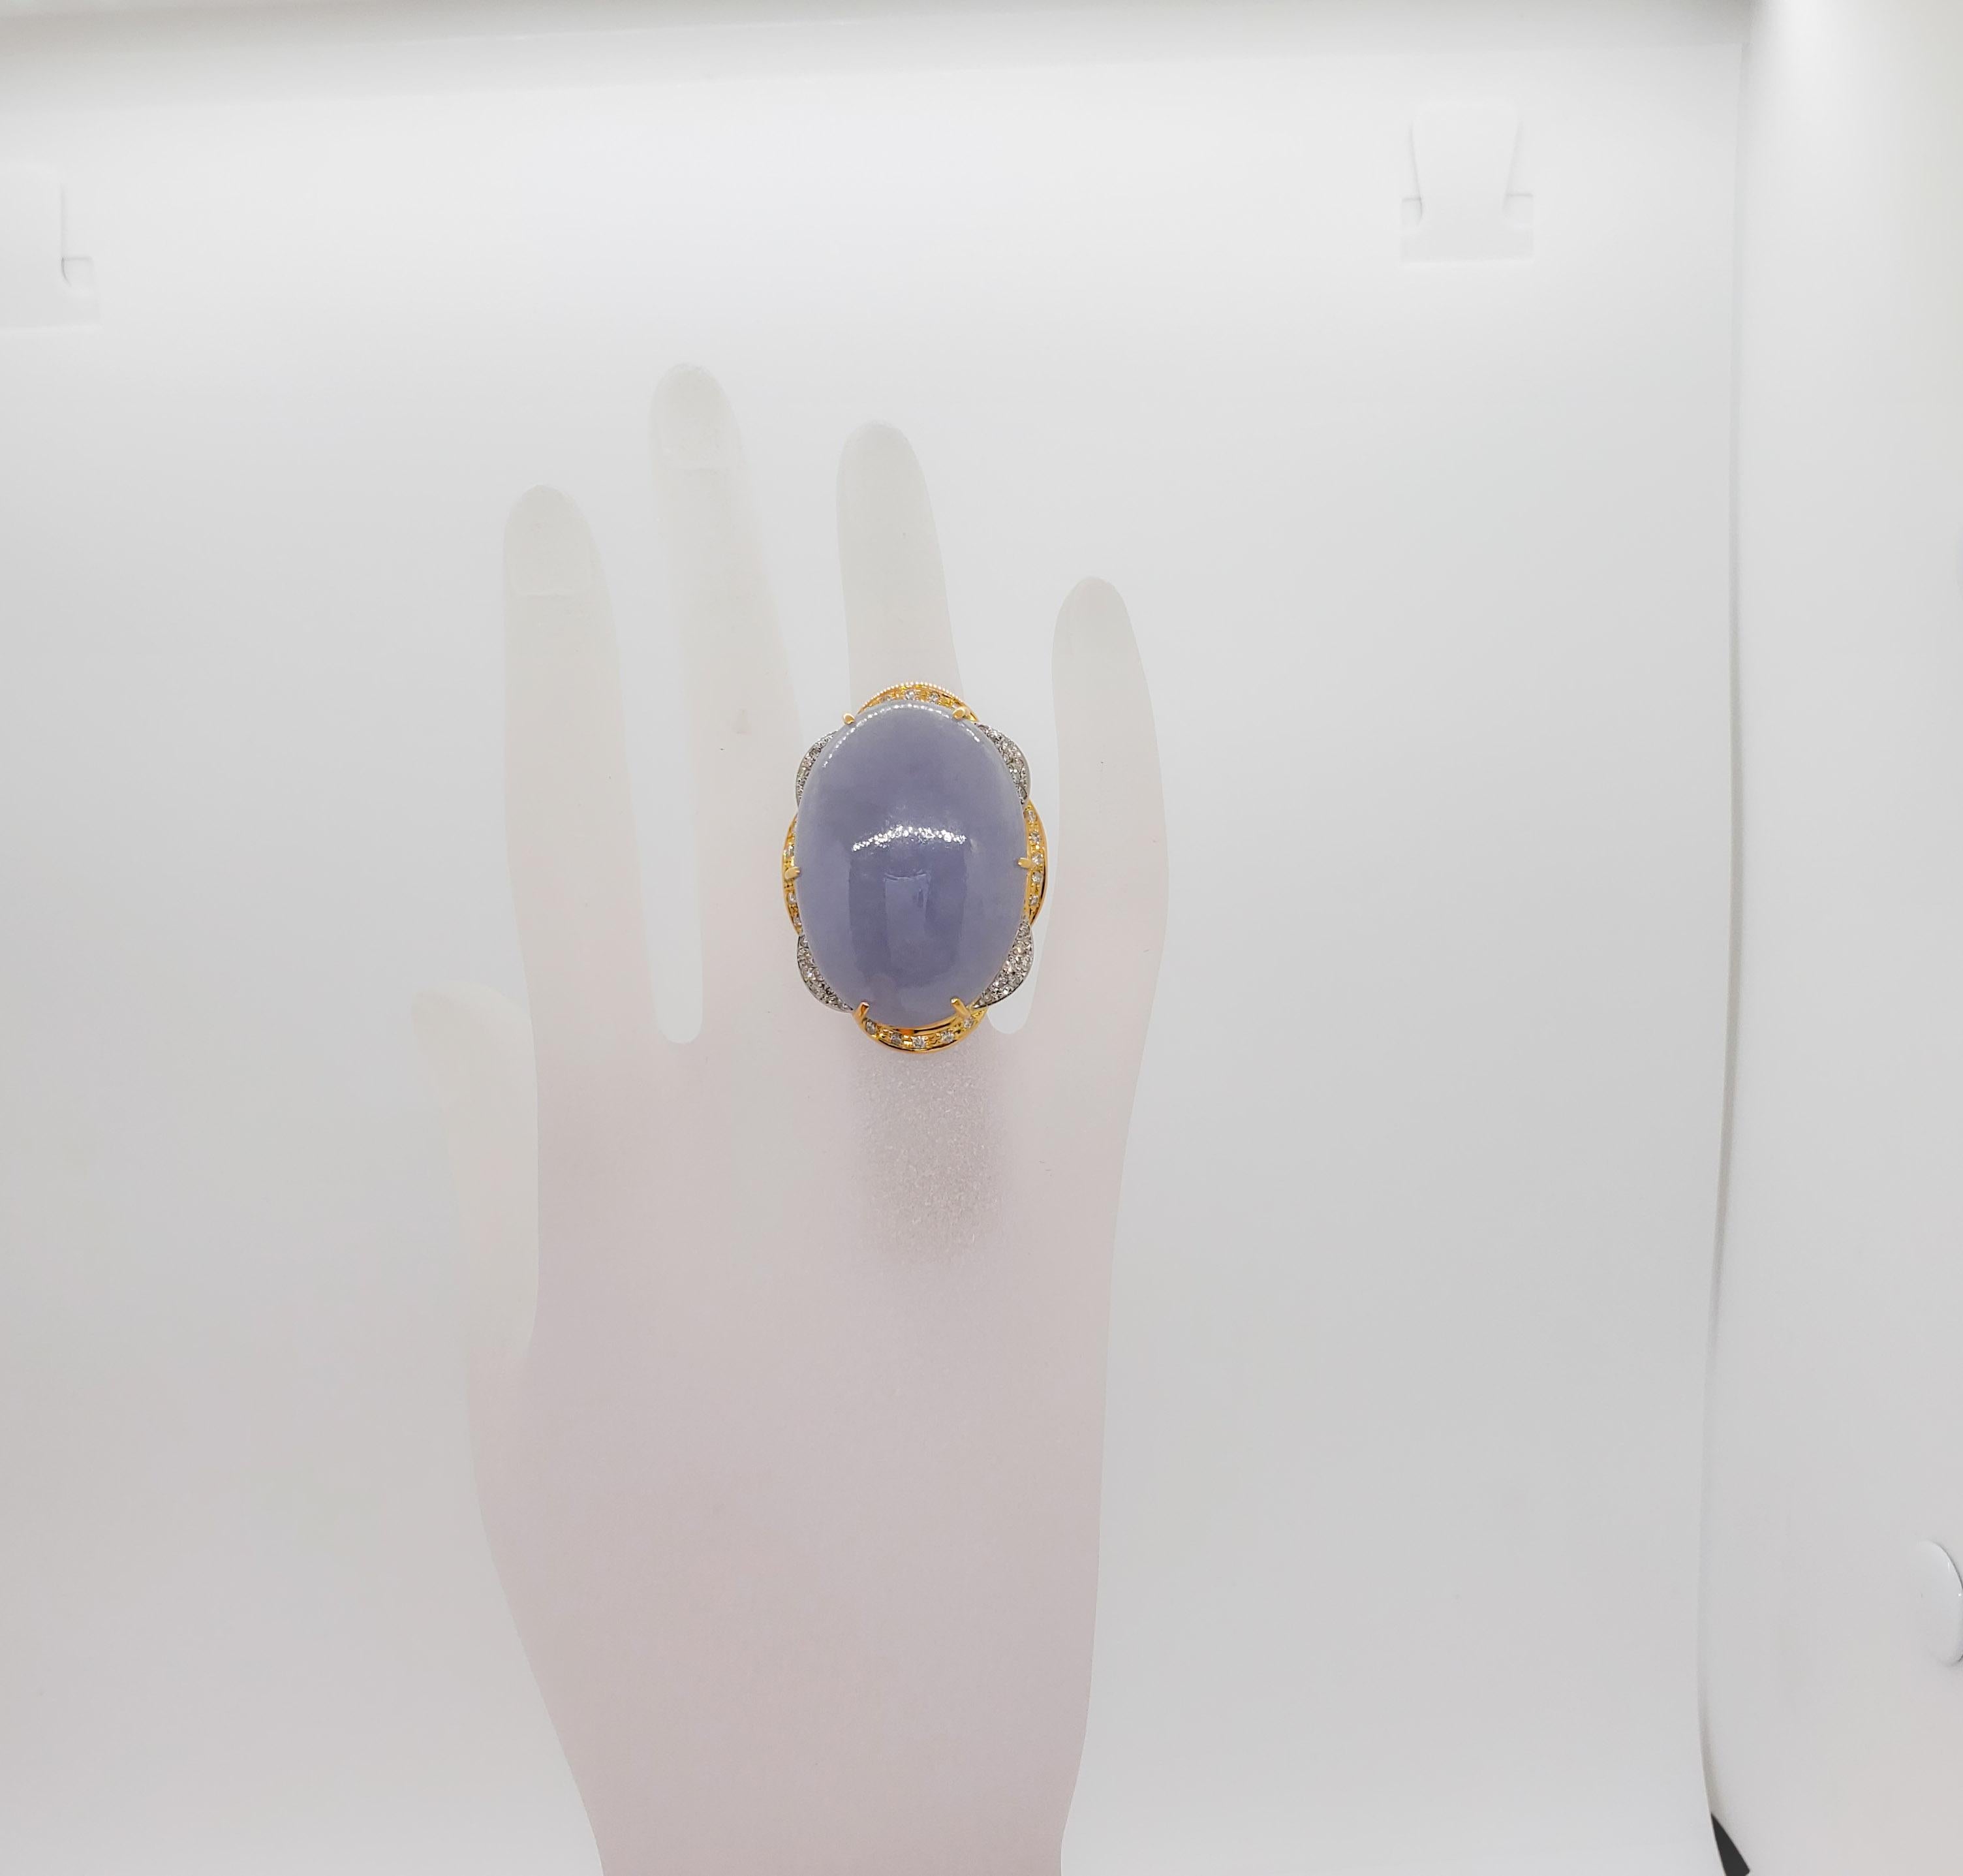 Gorgeous 70.68 ct. lavender jade oval cabochon with 0.73 ct. white diamond rounds.  Handmade 18k yellow gold and platinum mounting.  Ring size 6.